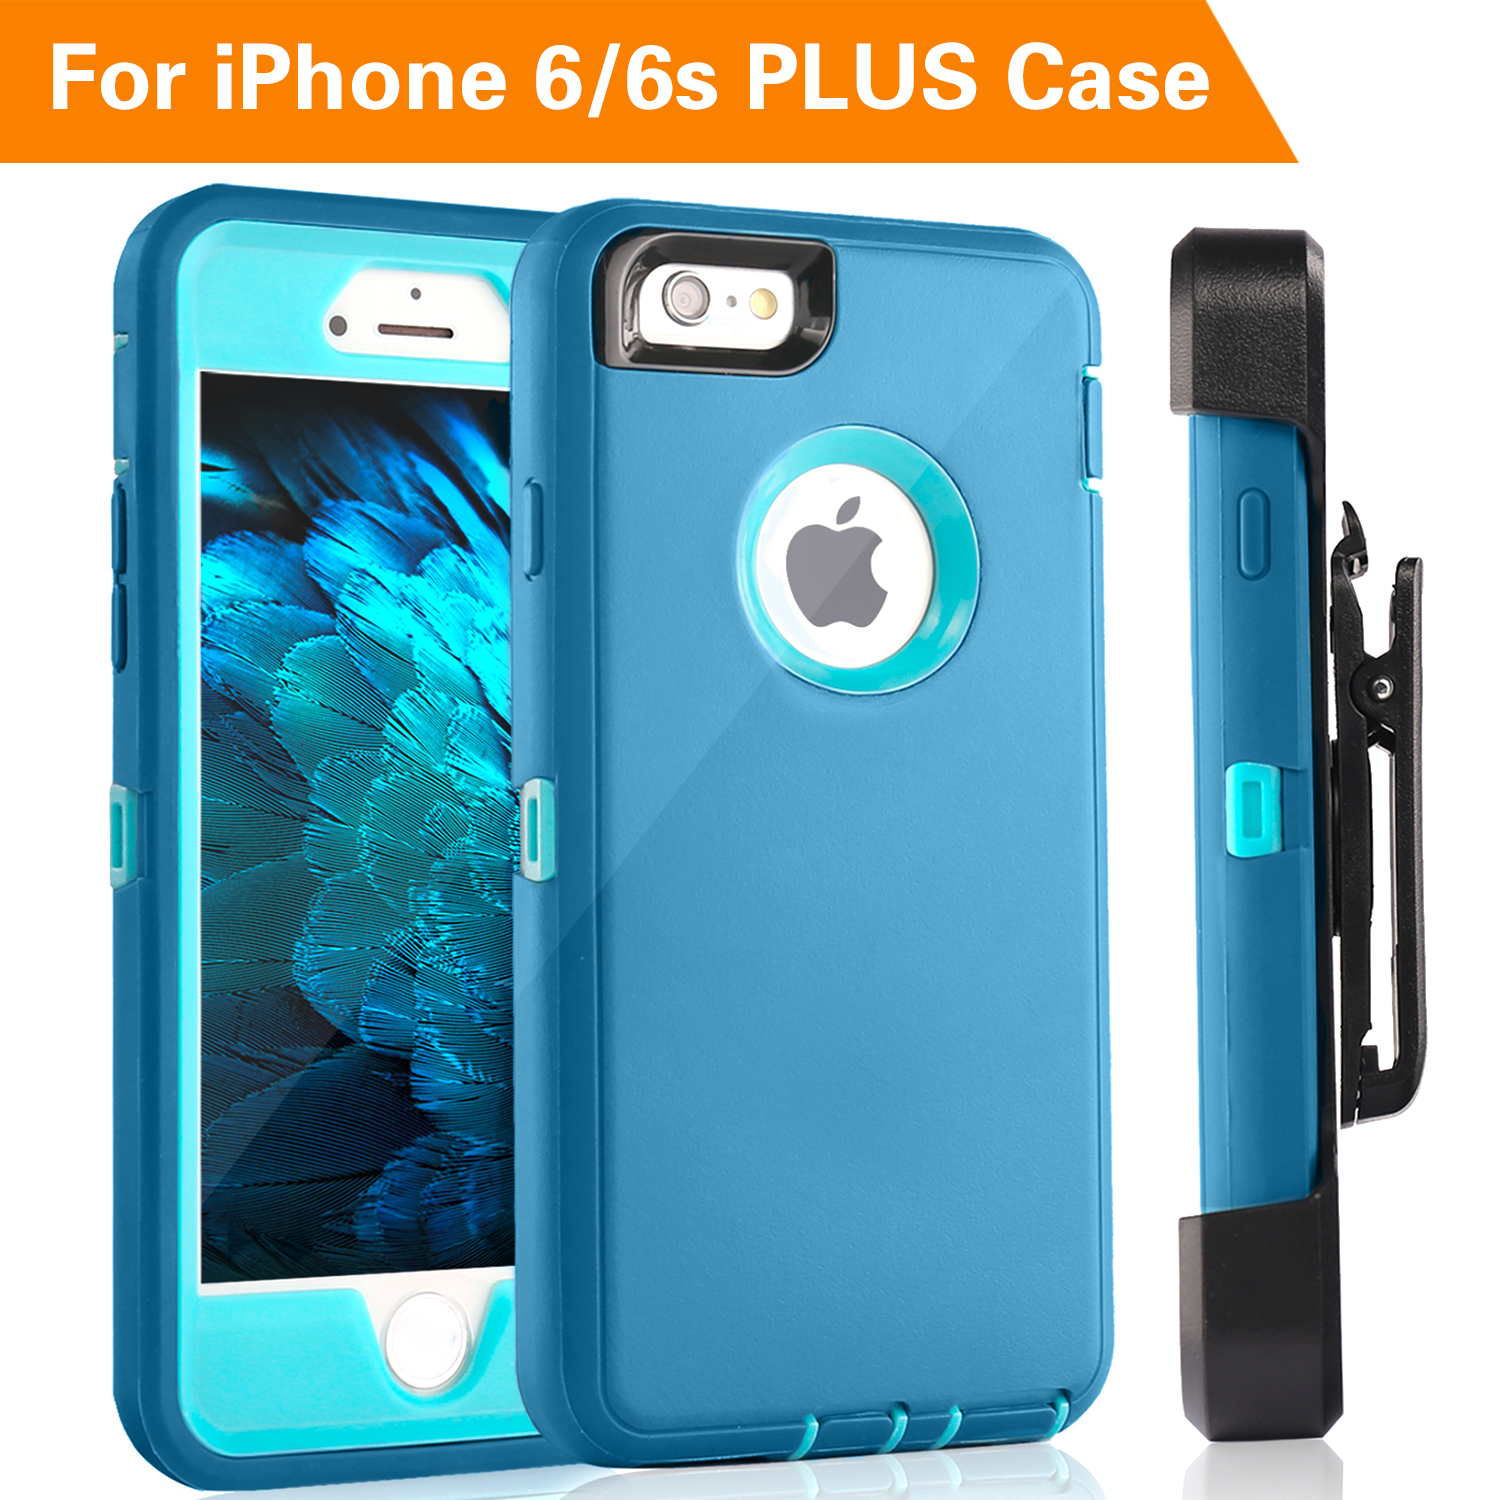 iPhone 6S Plus Case,Fogeek PC TPU Combo Protective Case Heavy Duty Protective  Compatible for iPhone 6 Plus & iPhone 6S Plus 5.5 inch 360 Degree Rotary Belt Clip & Kickstand(Tea Blue/Baby Blue)